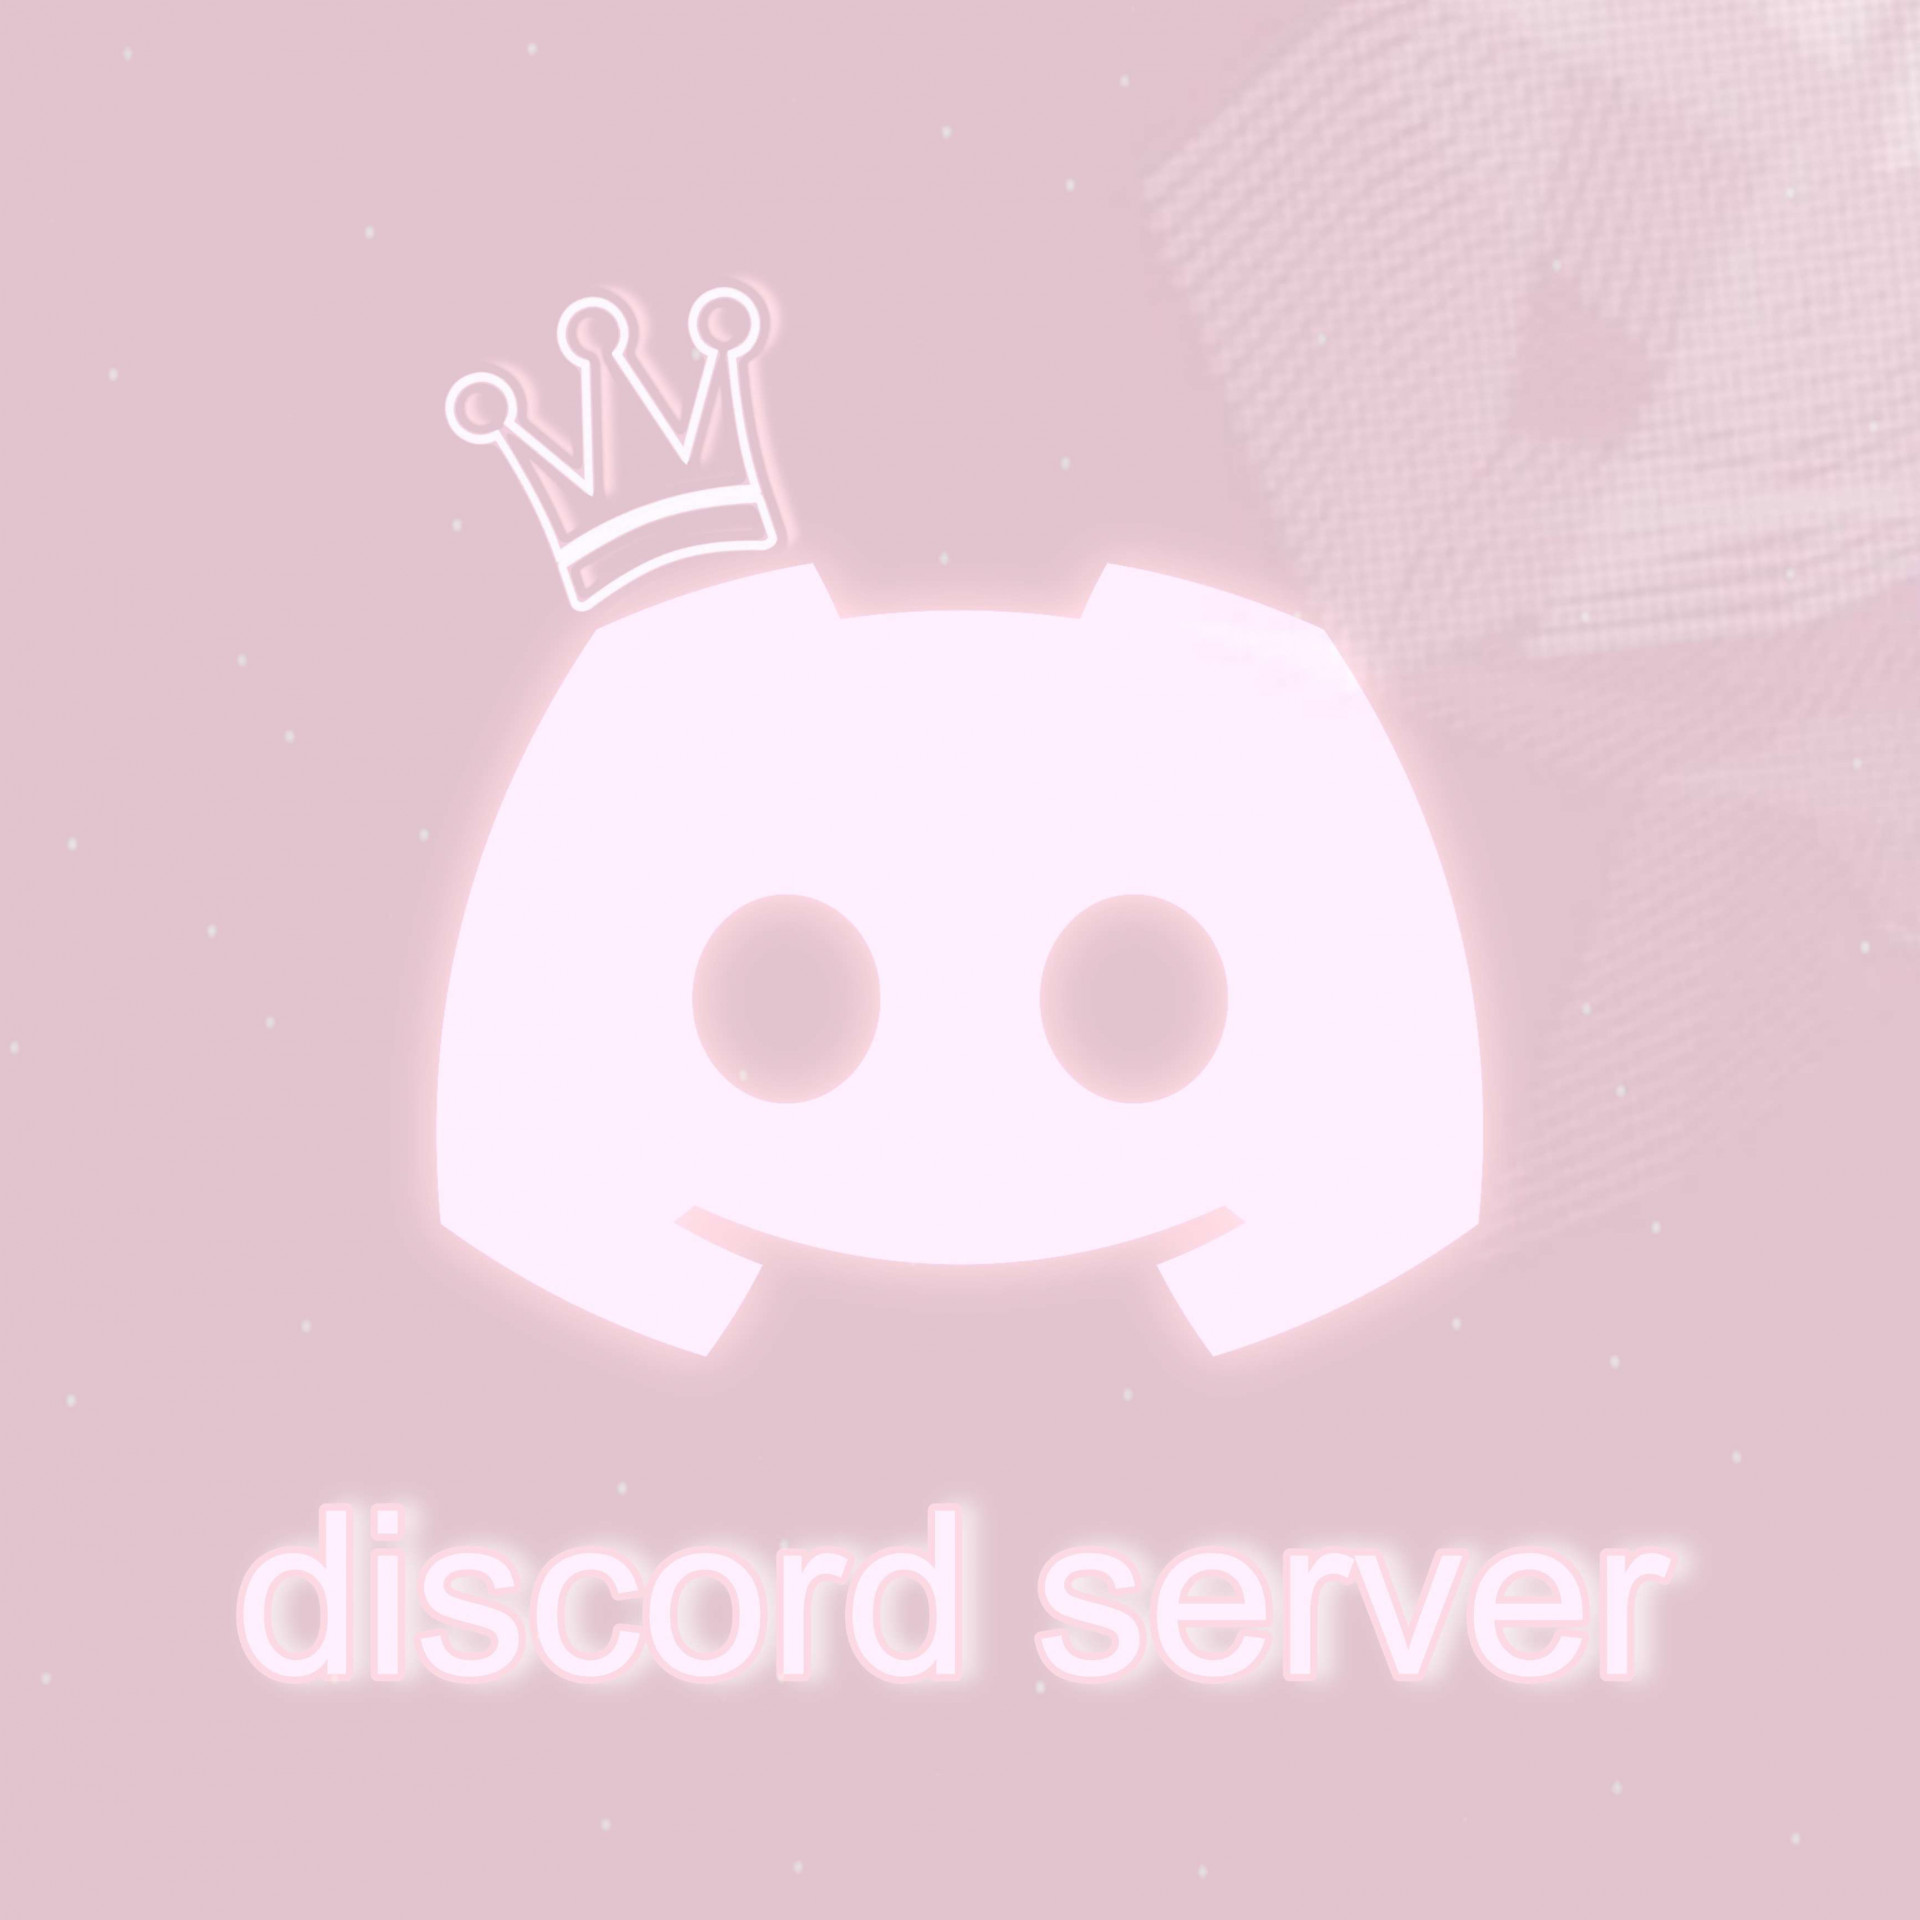 Made a new animation for the discord server logo. I'd love to see it there  if y'all want :) DM PhonxGaym#6969 on disc : r/EchoArena